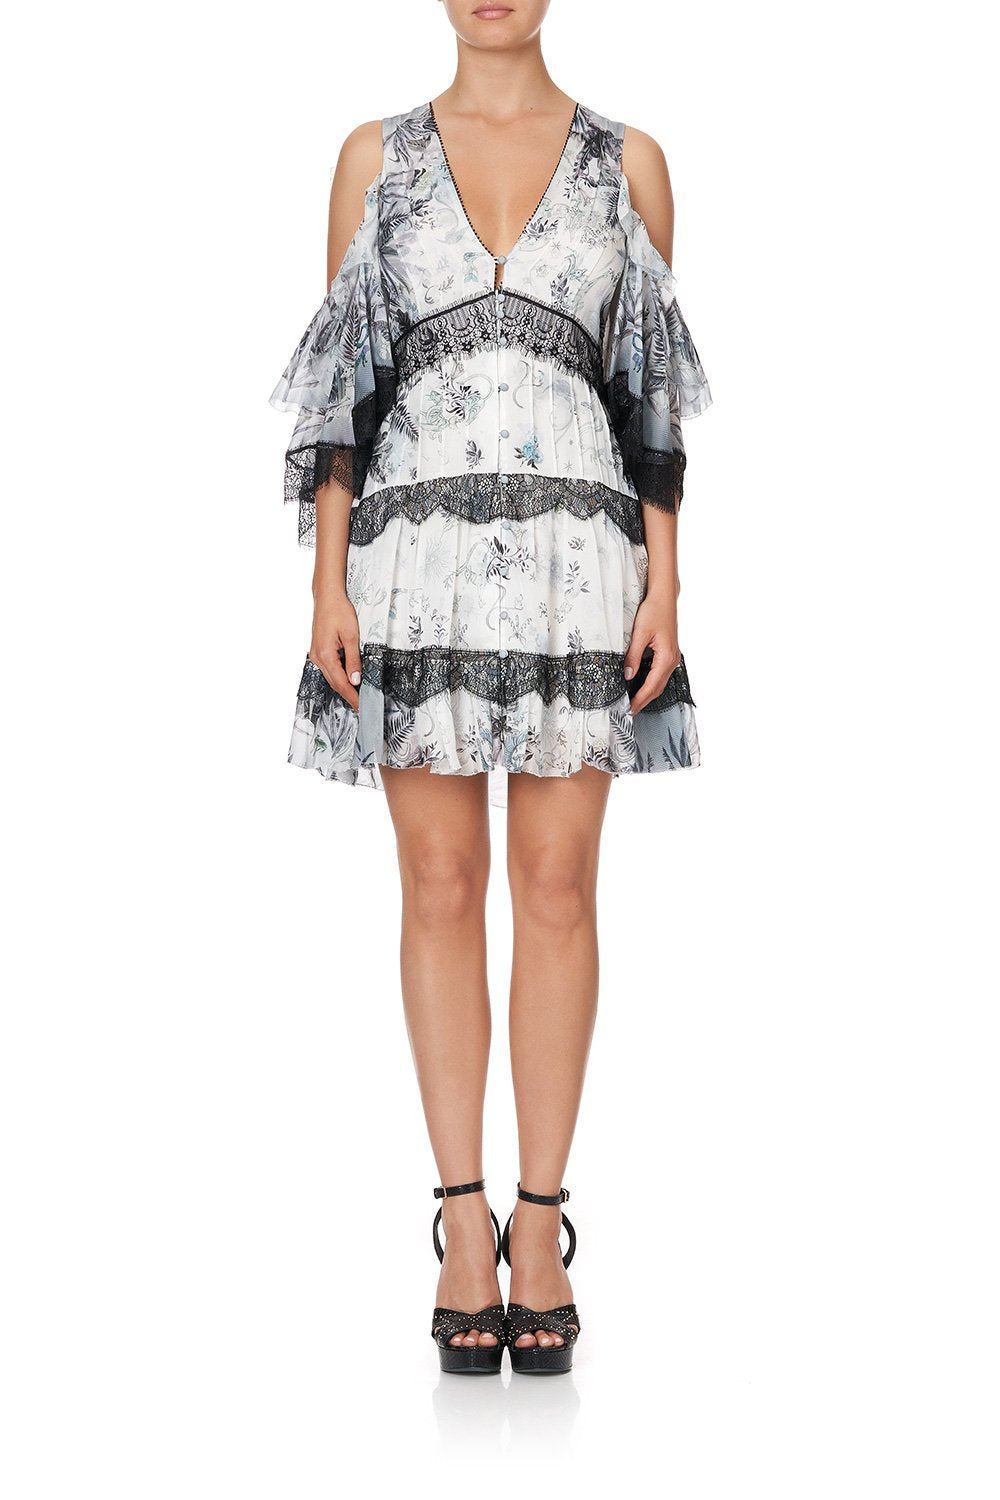 BUTTON UP DRESS WITH LACE INSERT MOONLIT MUSINGS